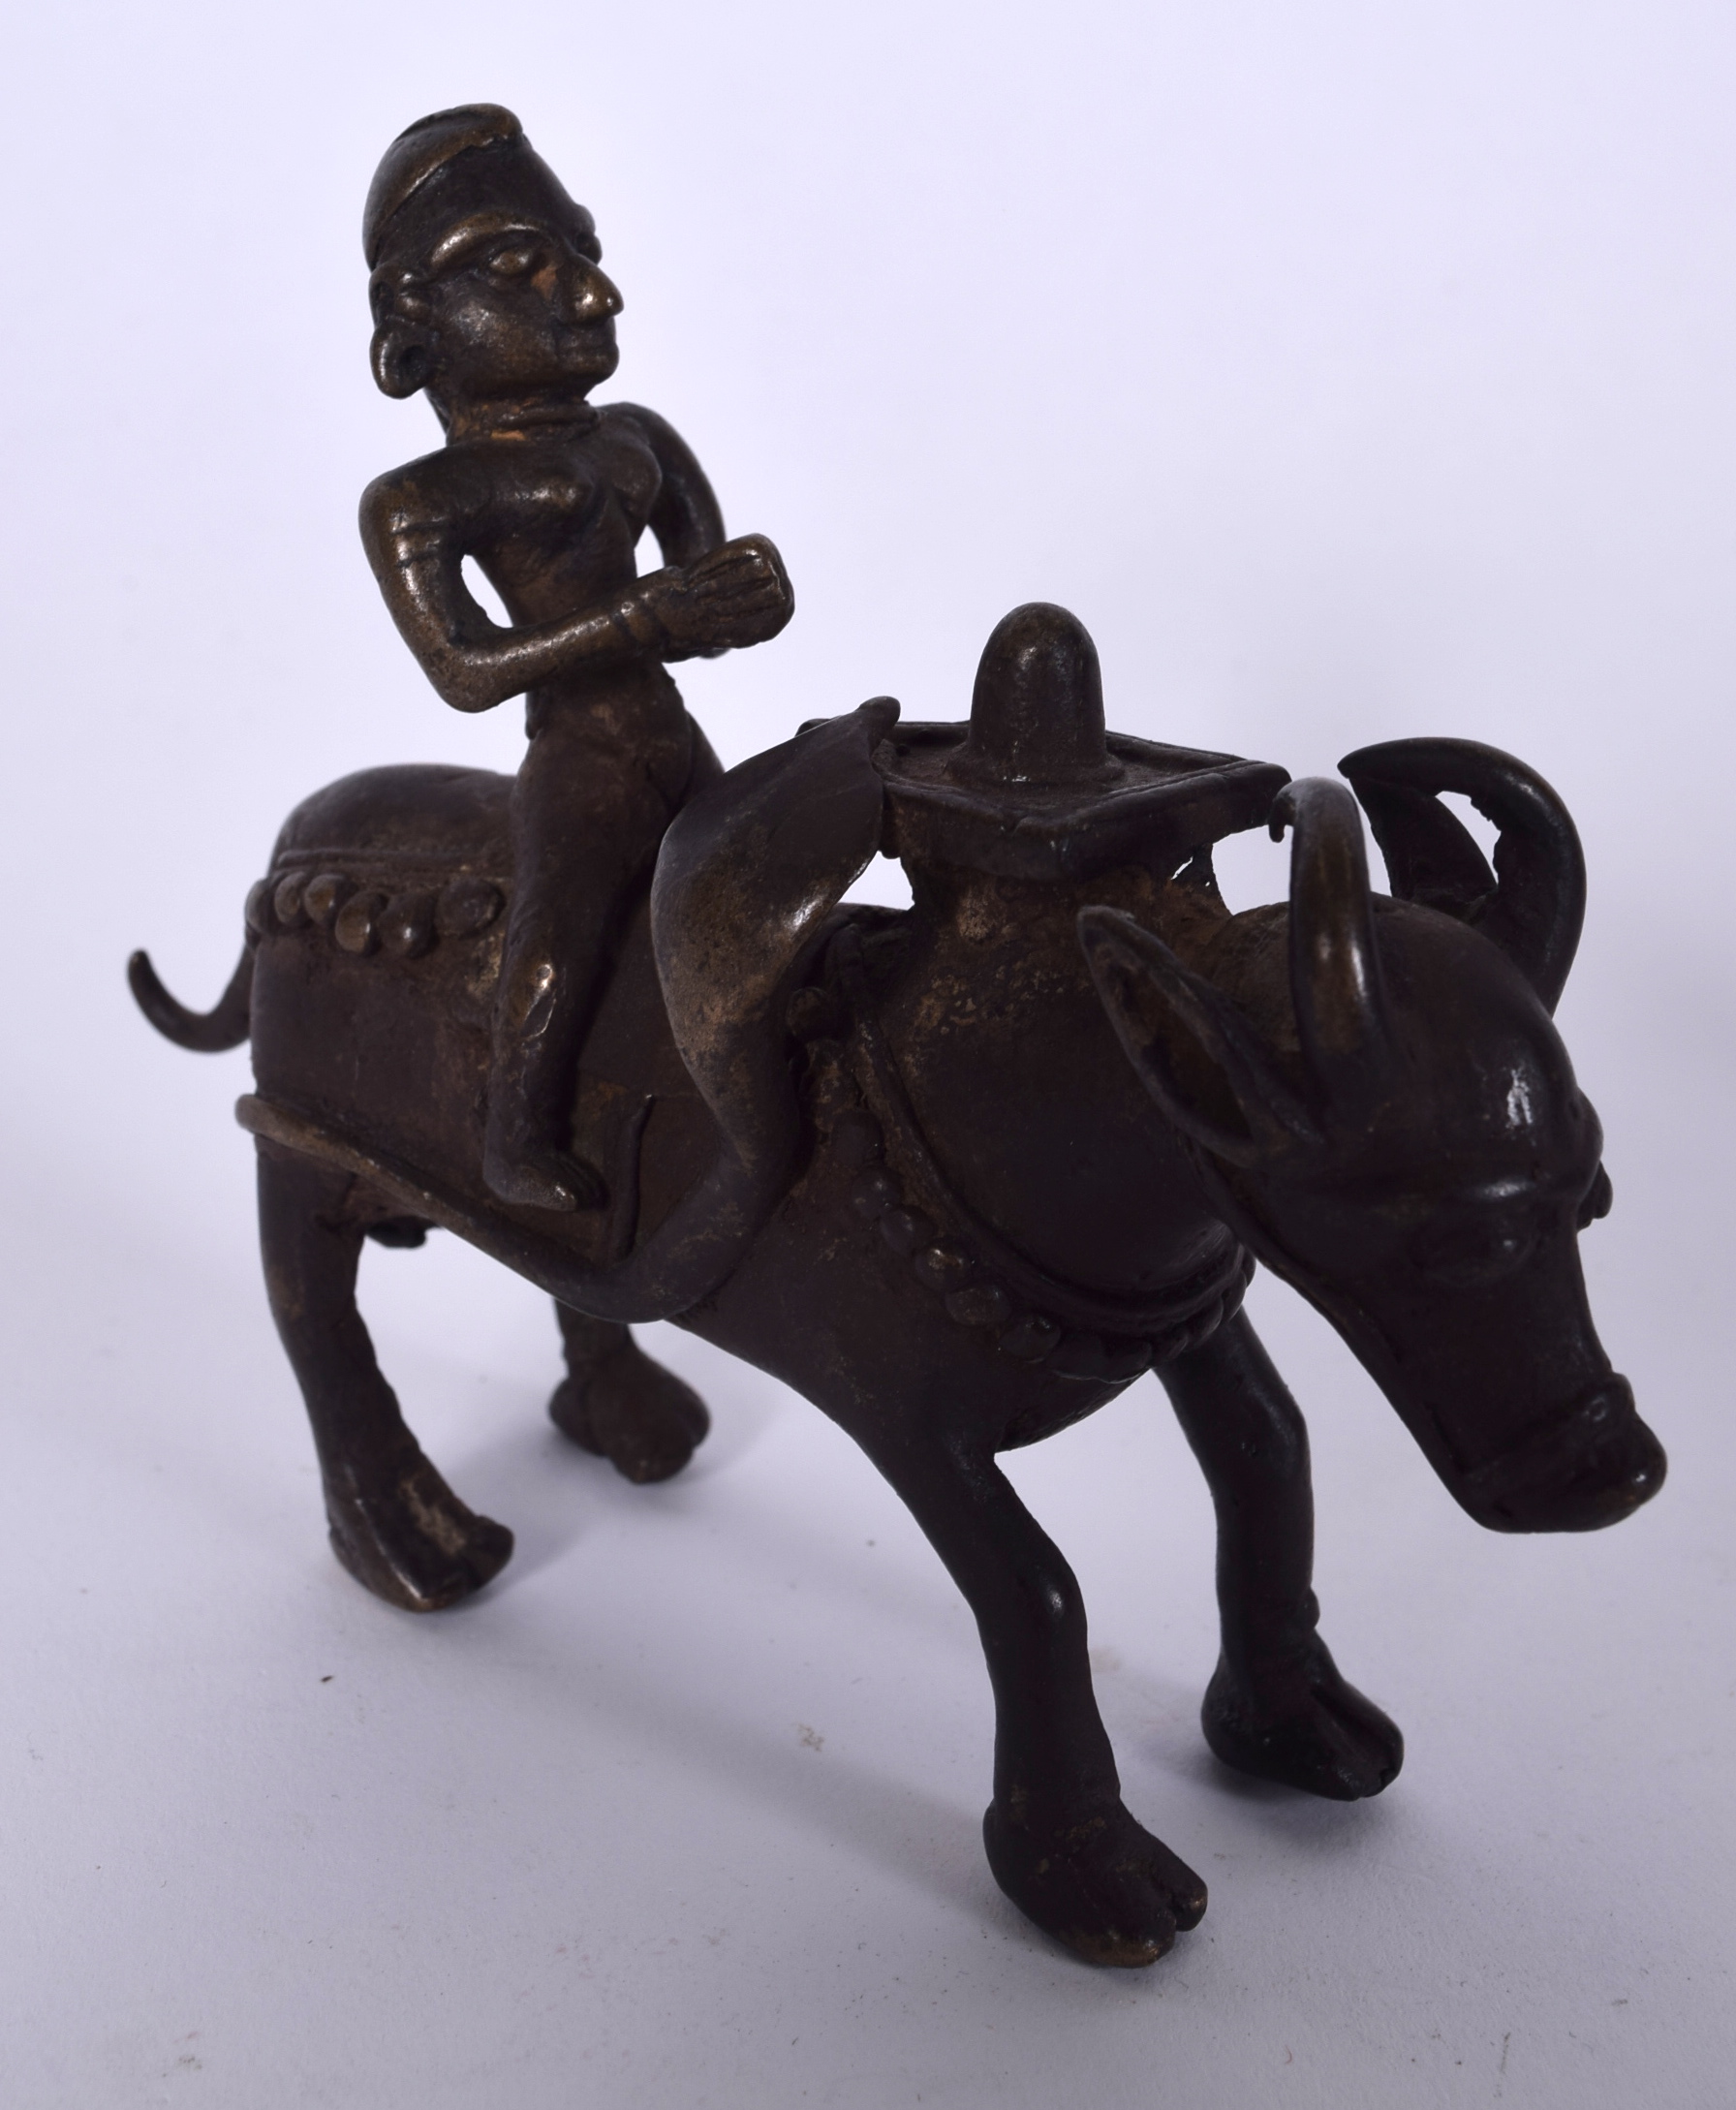 AN INDIAN BRONZE STATUE, formed as a male upon the back of an oxon. 12.5 cm wide.